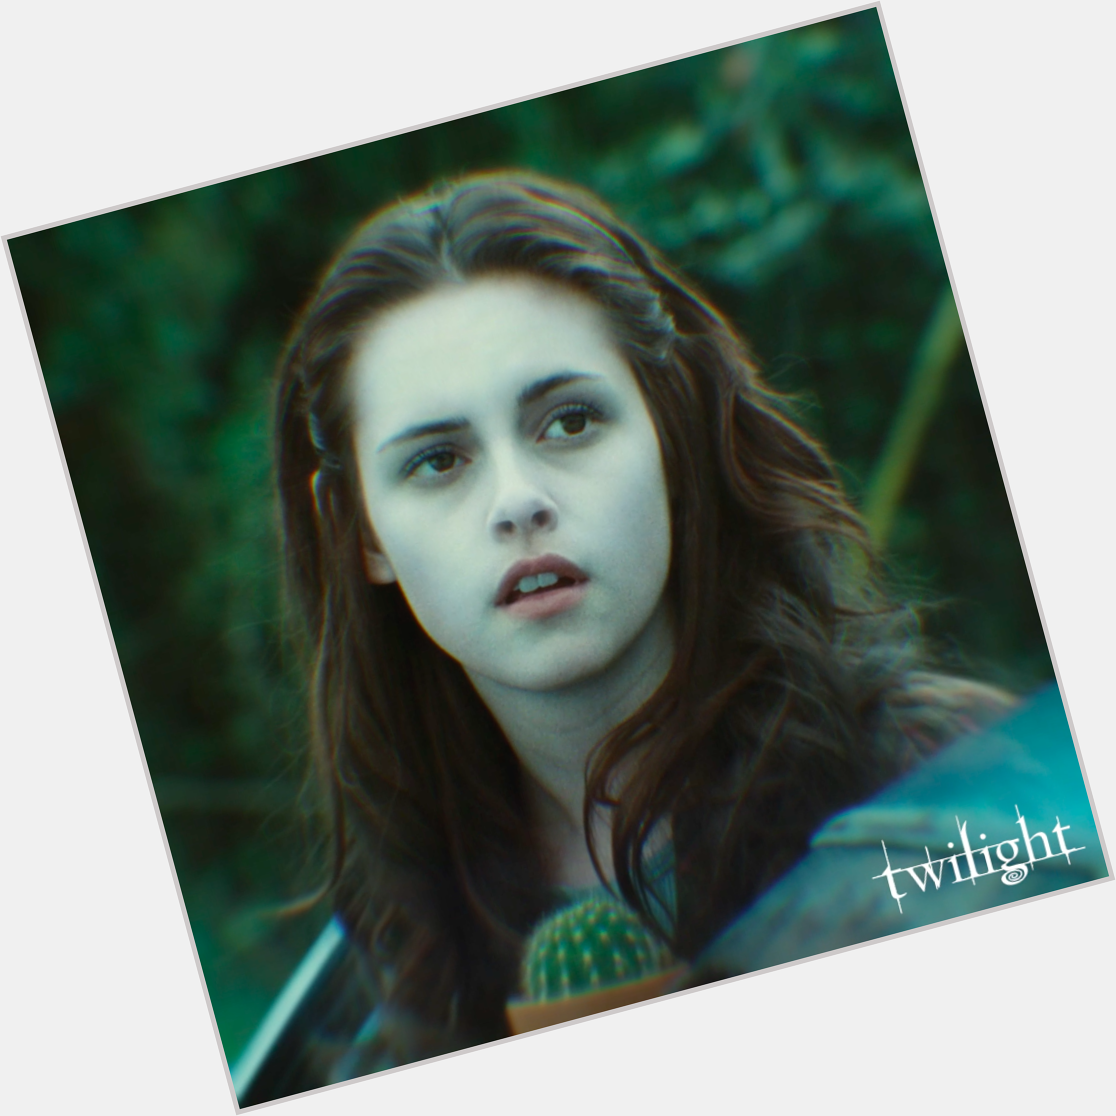 Happy birthday bella swan you were my idol when i was in middle school plus virgos are all queens 